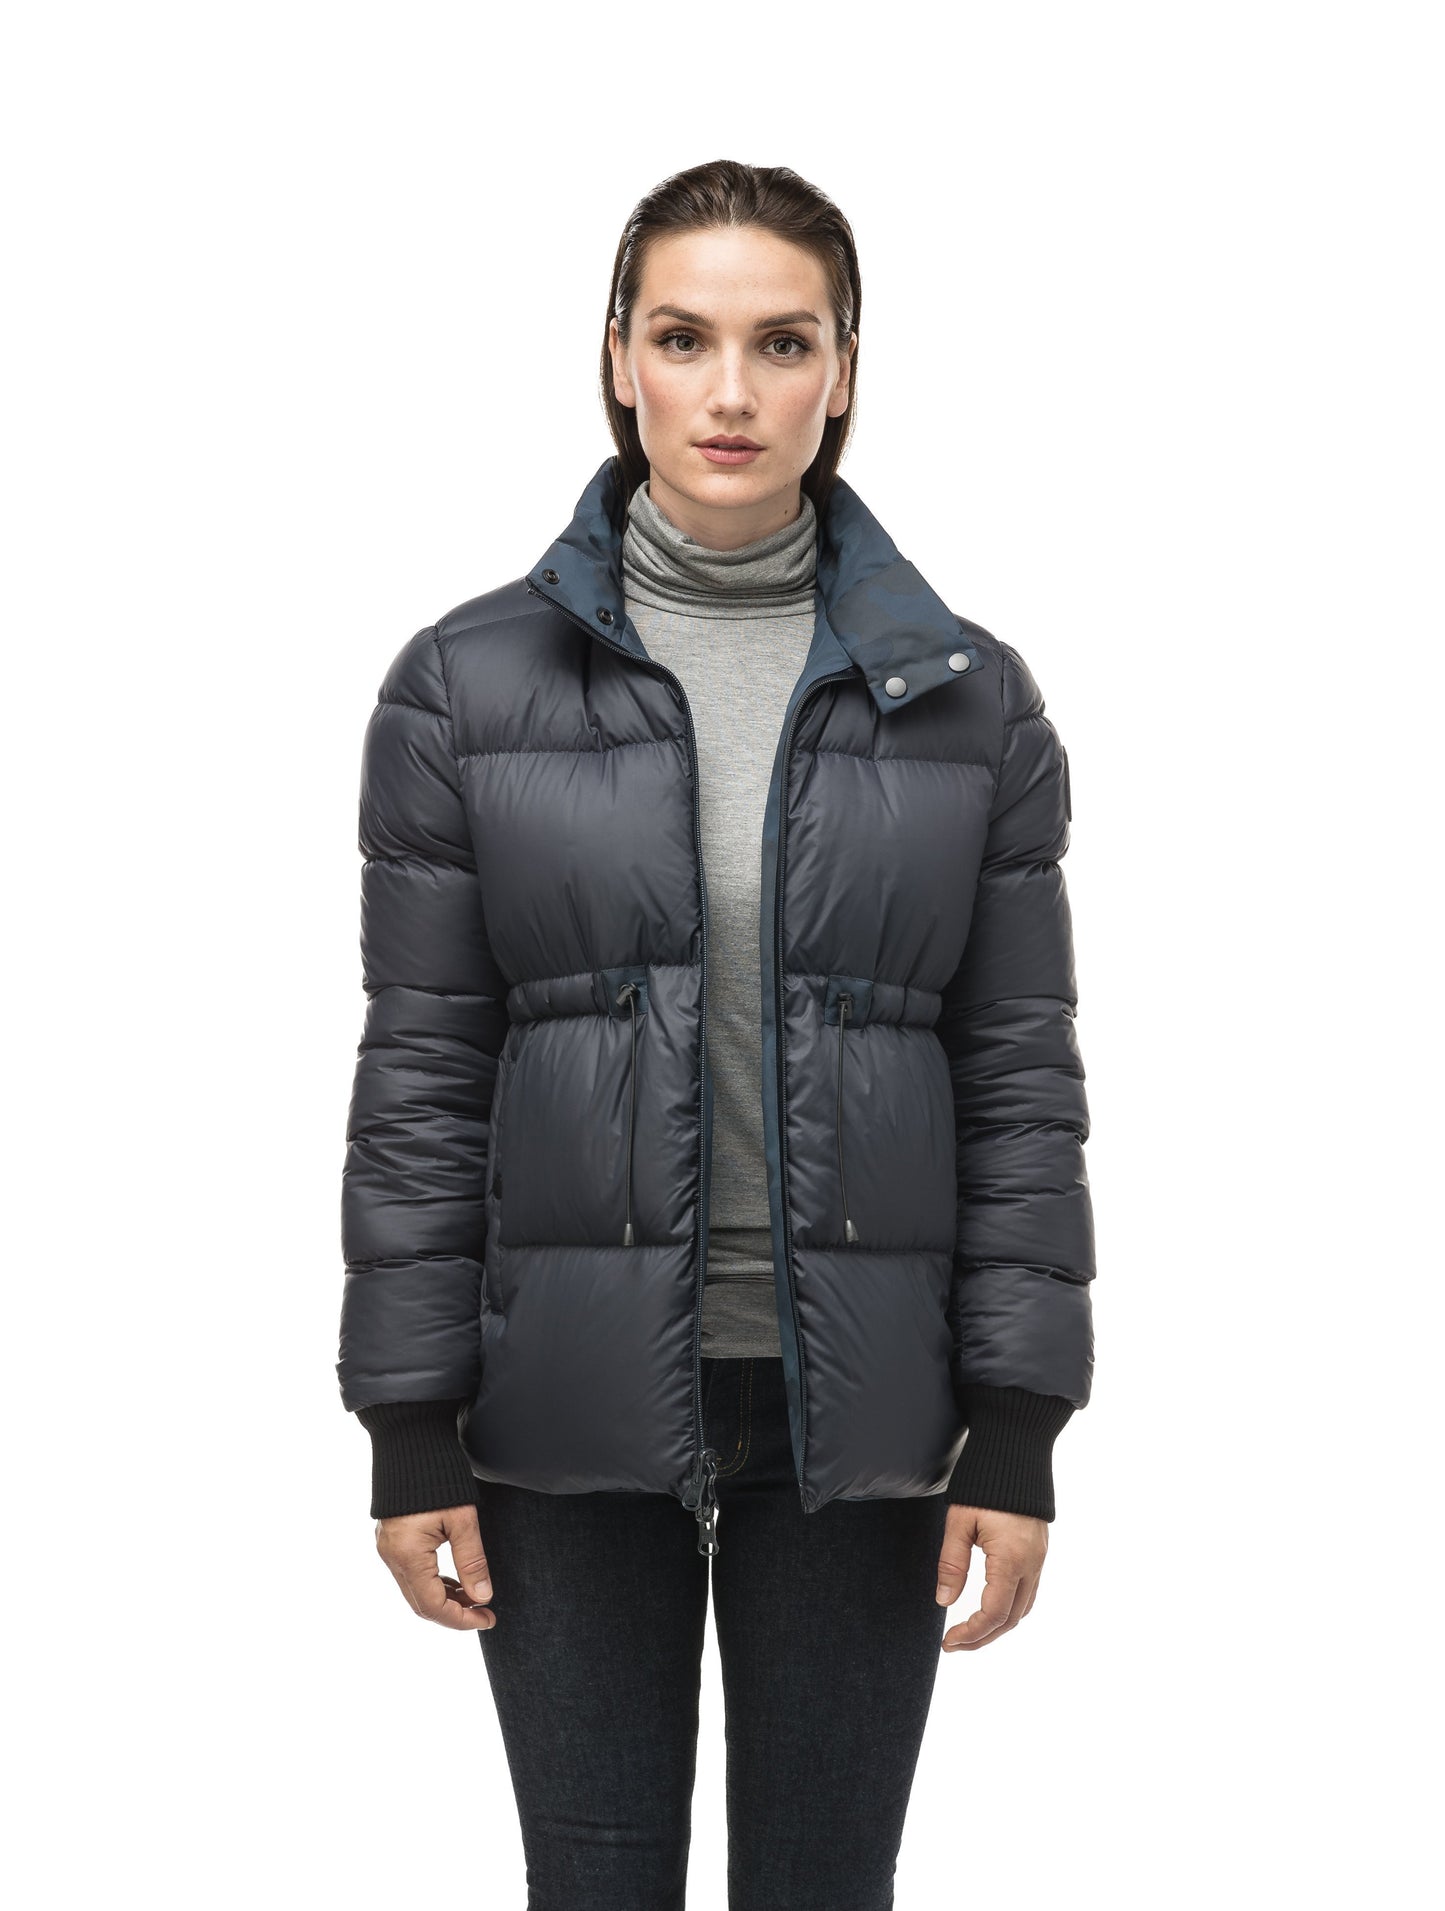 Hip length, reversible women's down filled jacket with waterproof exposed zipper in Navy Camo